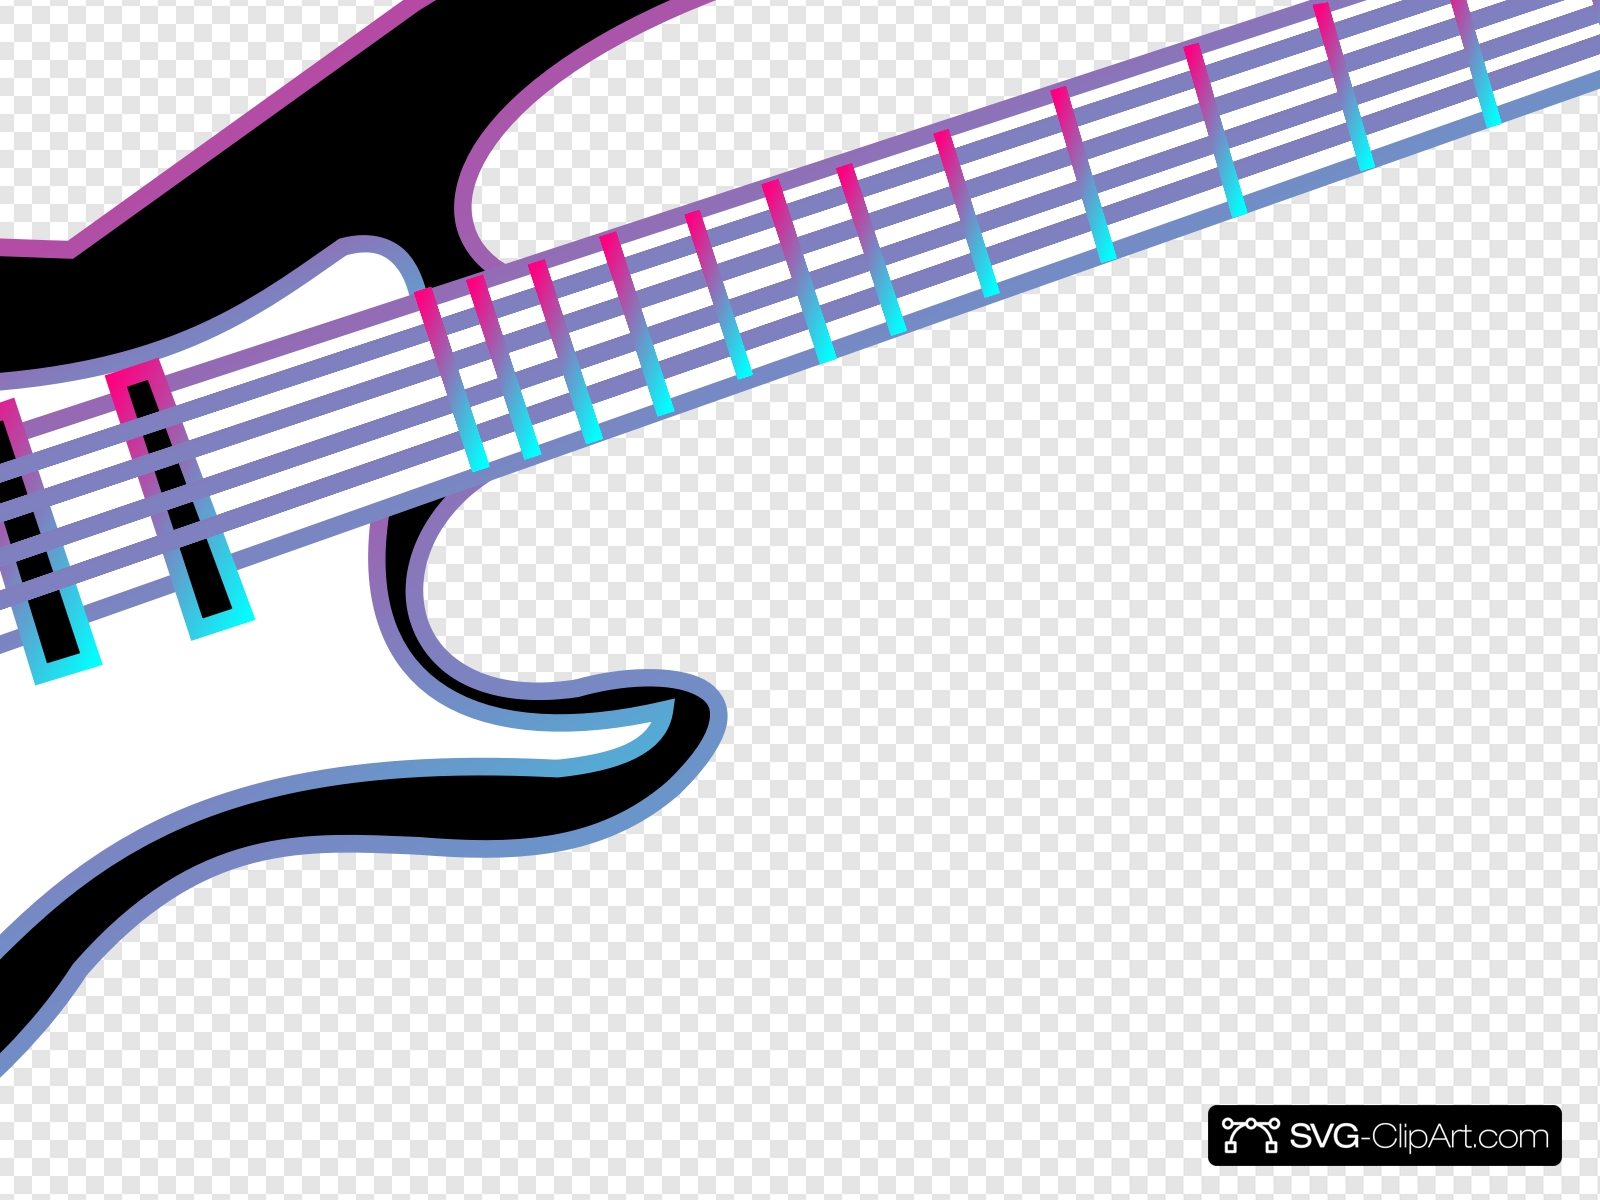 Rock On Clip art, Icon and SVG.